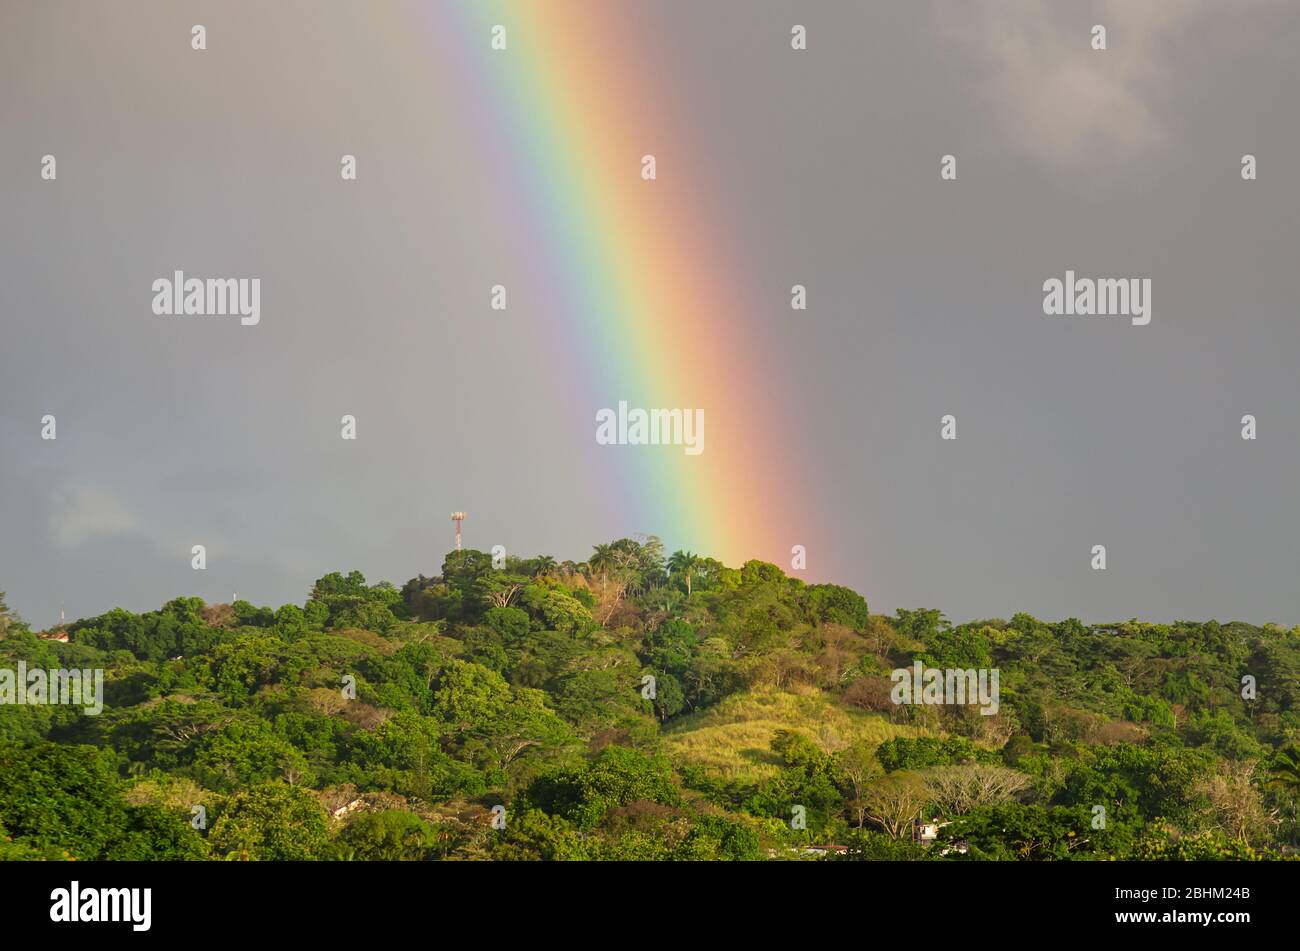 Vibrant rainbow arching over lush forested hills in the countryside Stock Photo